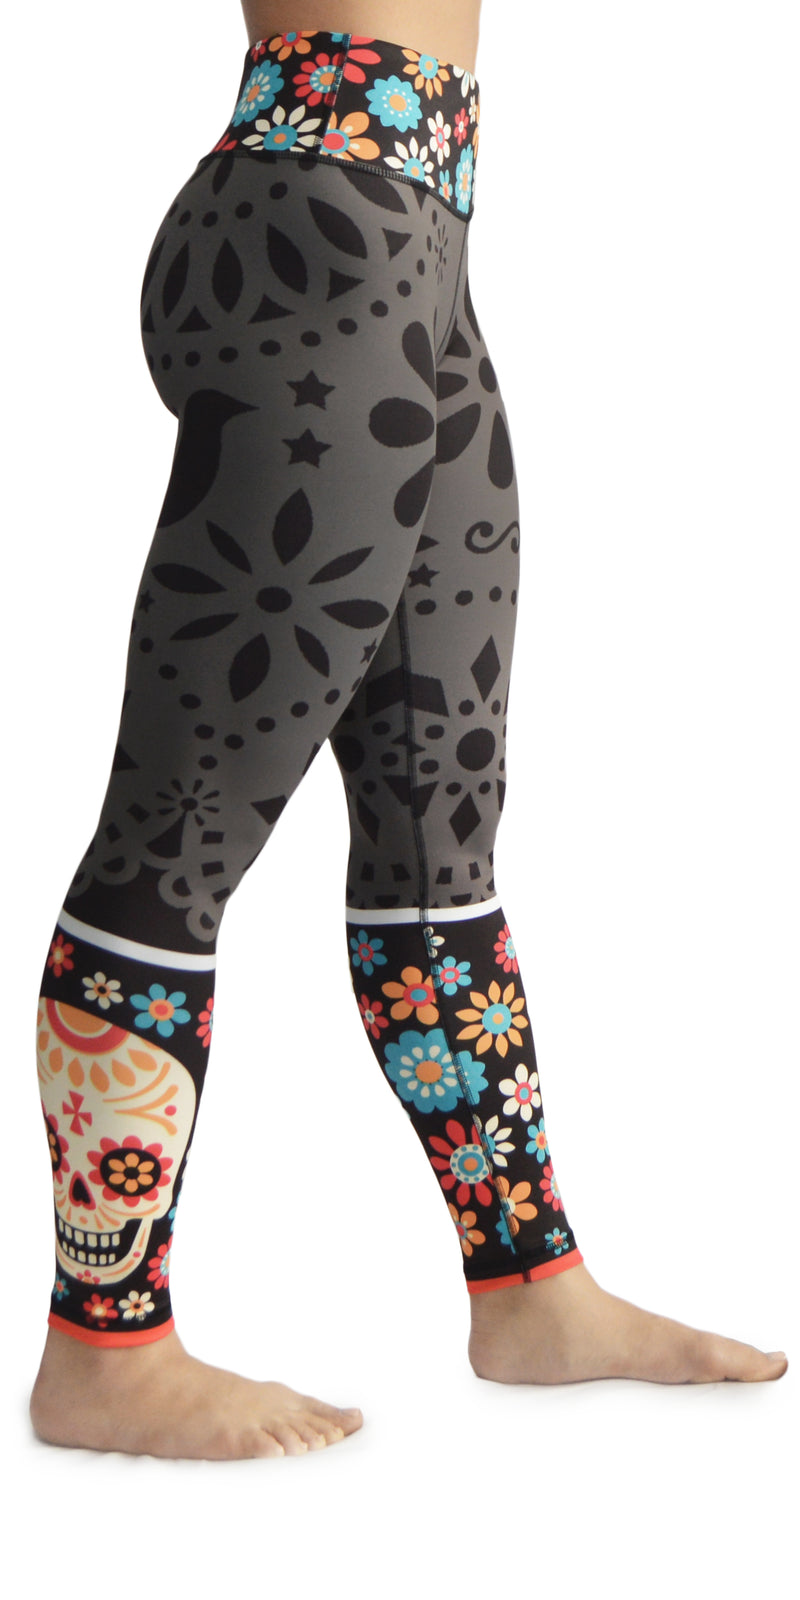 New Mix Buttery Soft Multi Colored Sugar Skull Leggings-one Size 0-14 